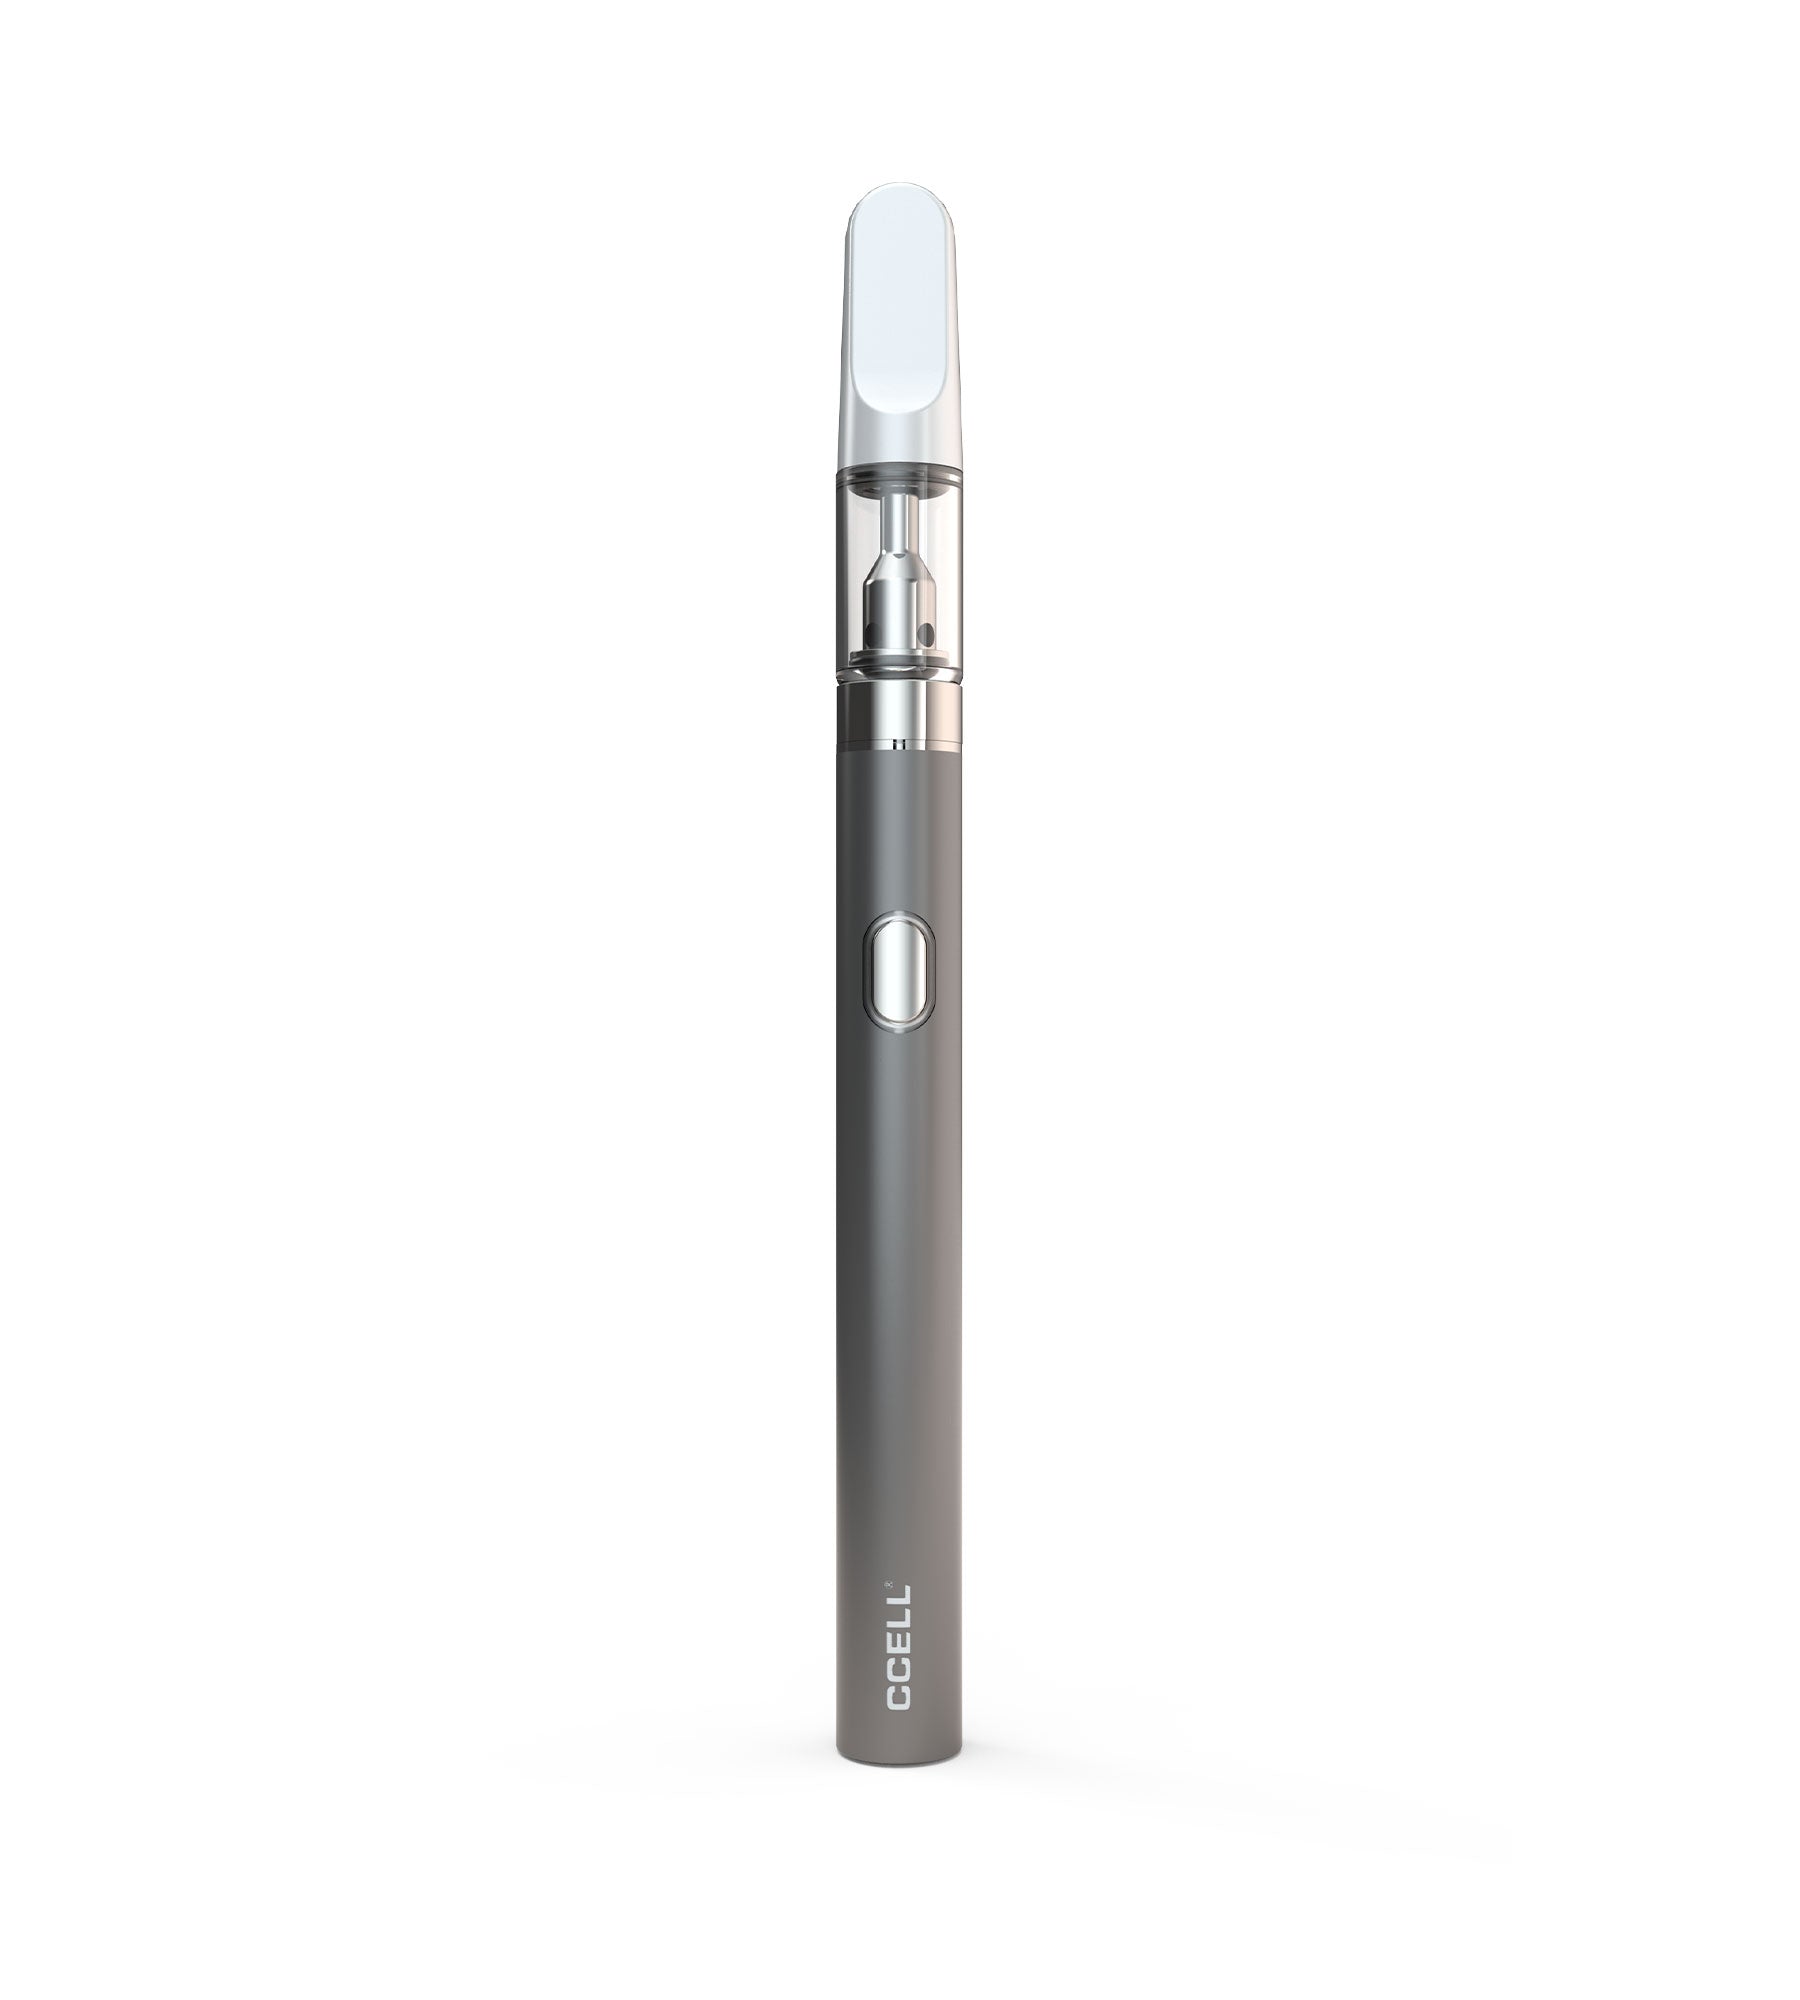 CCELL M3b